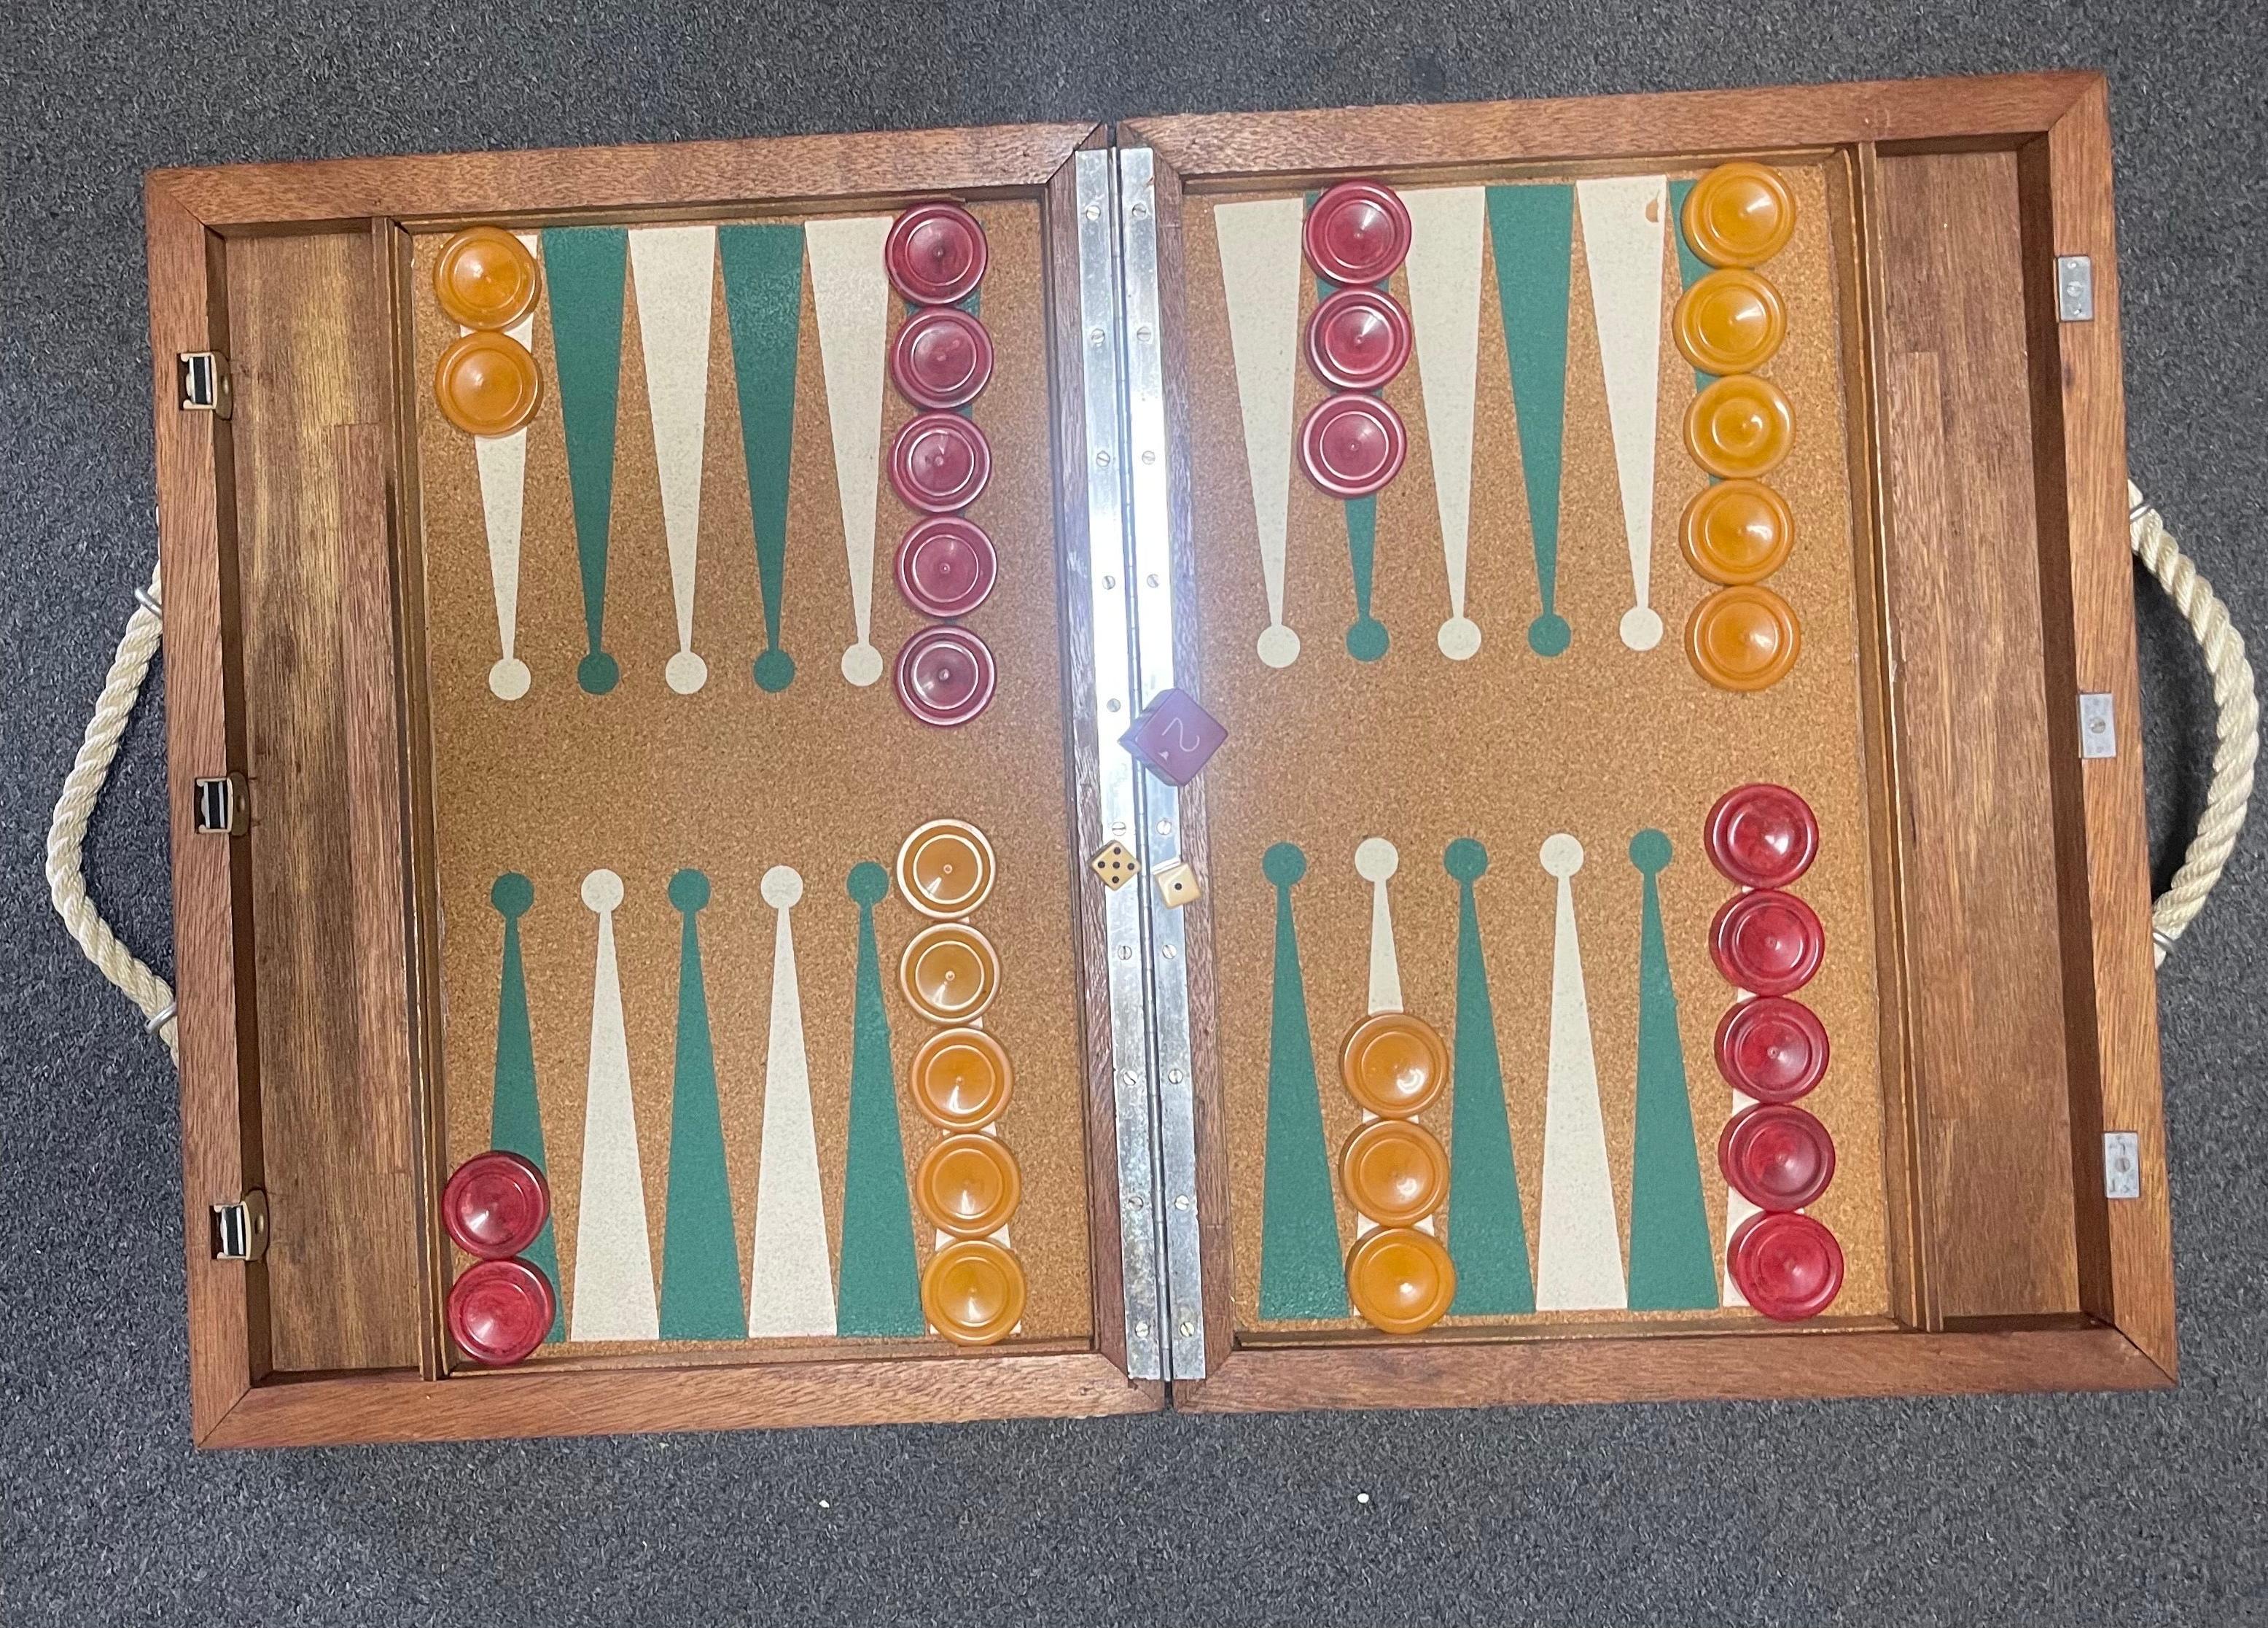 Vintage Art Deco cork and bakelite backgammon set, circa 1940s. Set is complete with a foldable wood board with cork inset, 30 bakelite checkers, doubling cube and a pair of dice. The set is in good vintage condition and the board measures 21